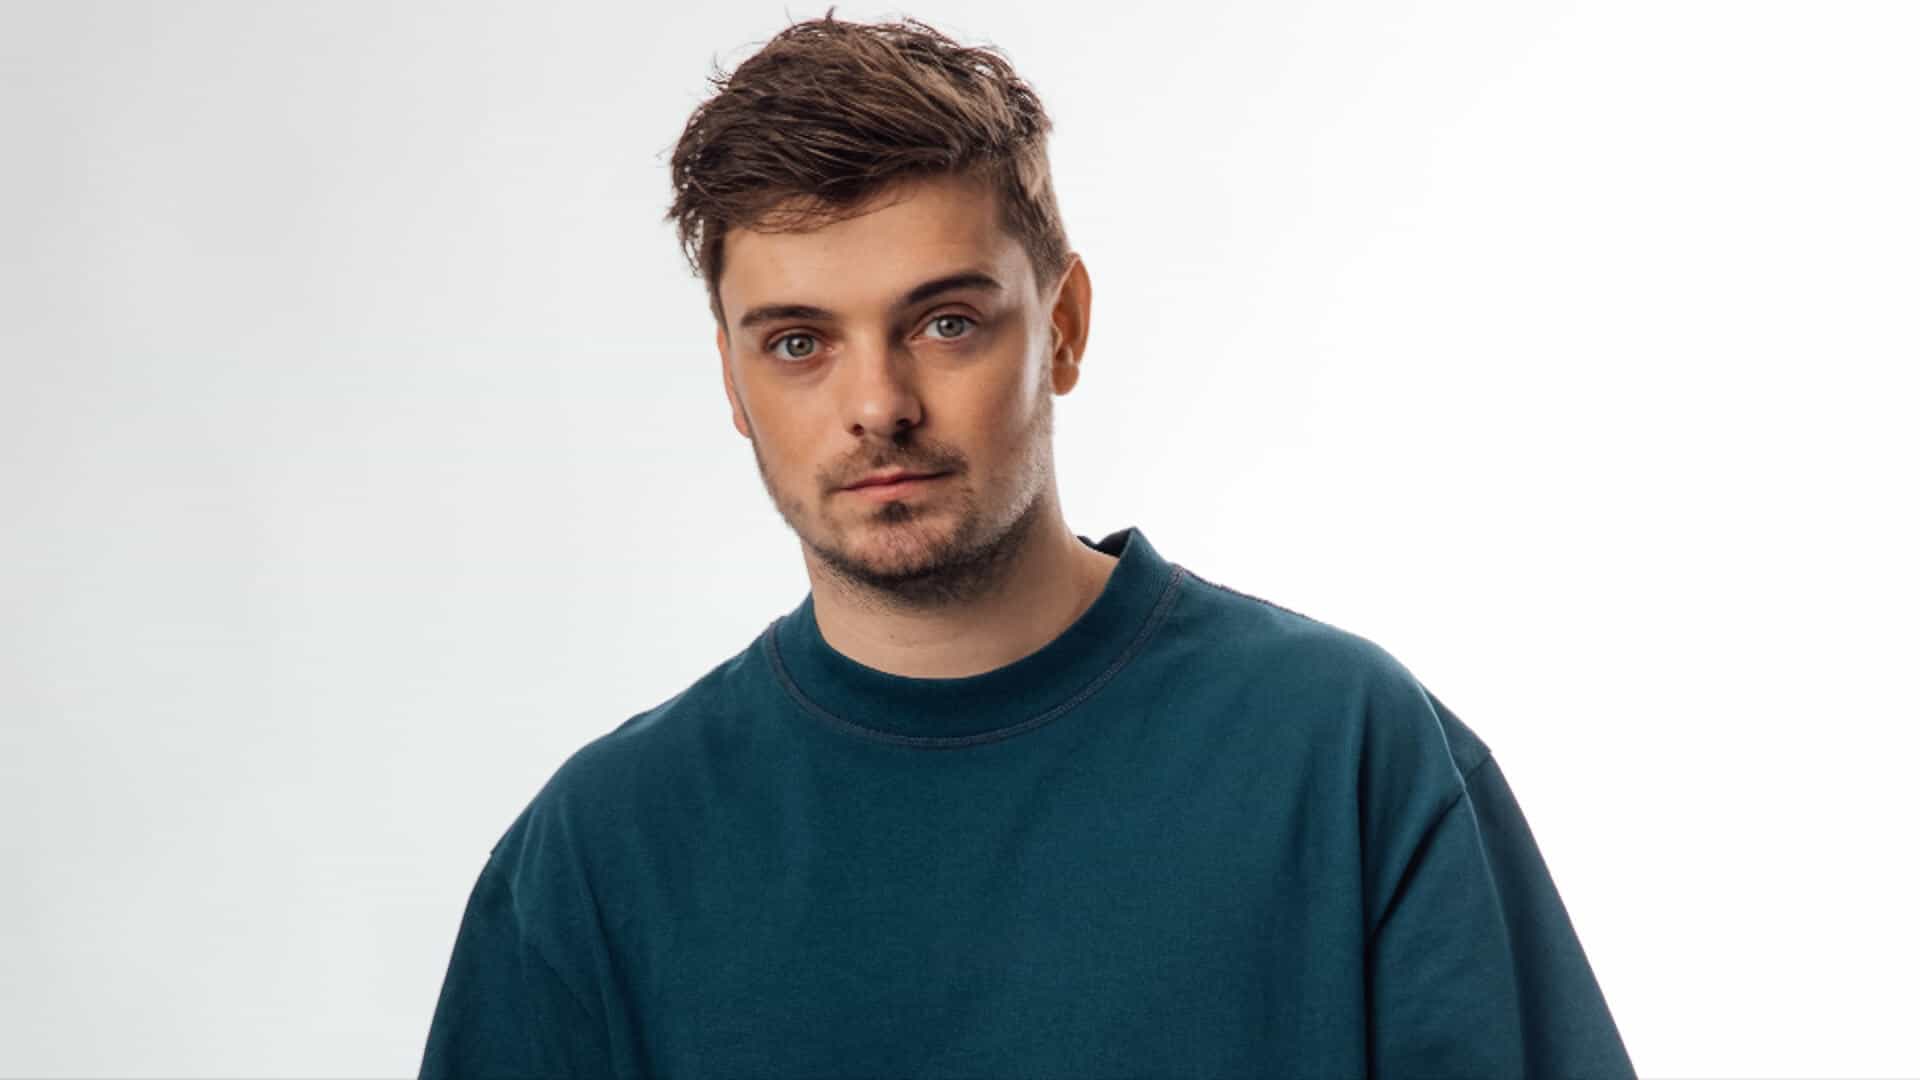 Martin Garrix confirms a collaboration with Marvel